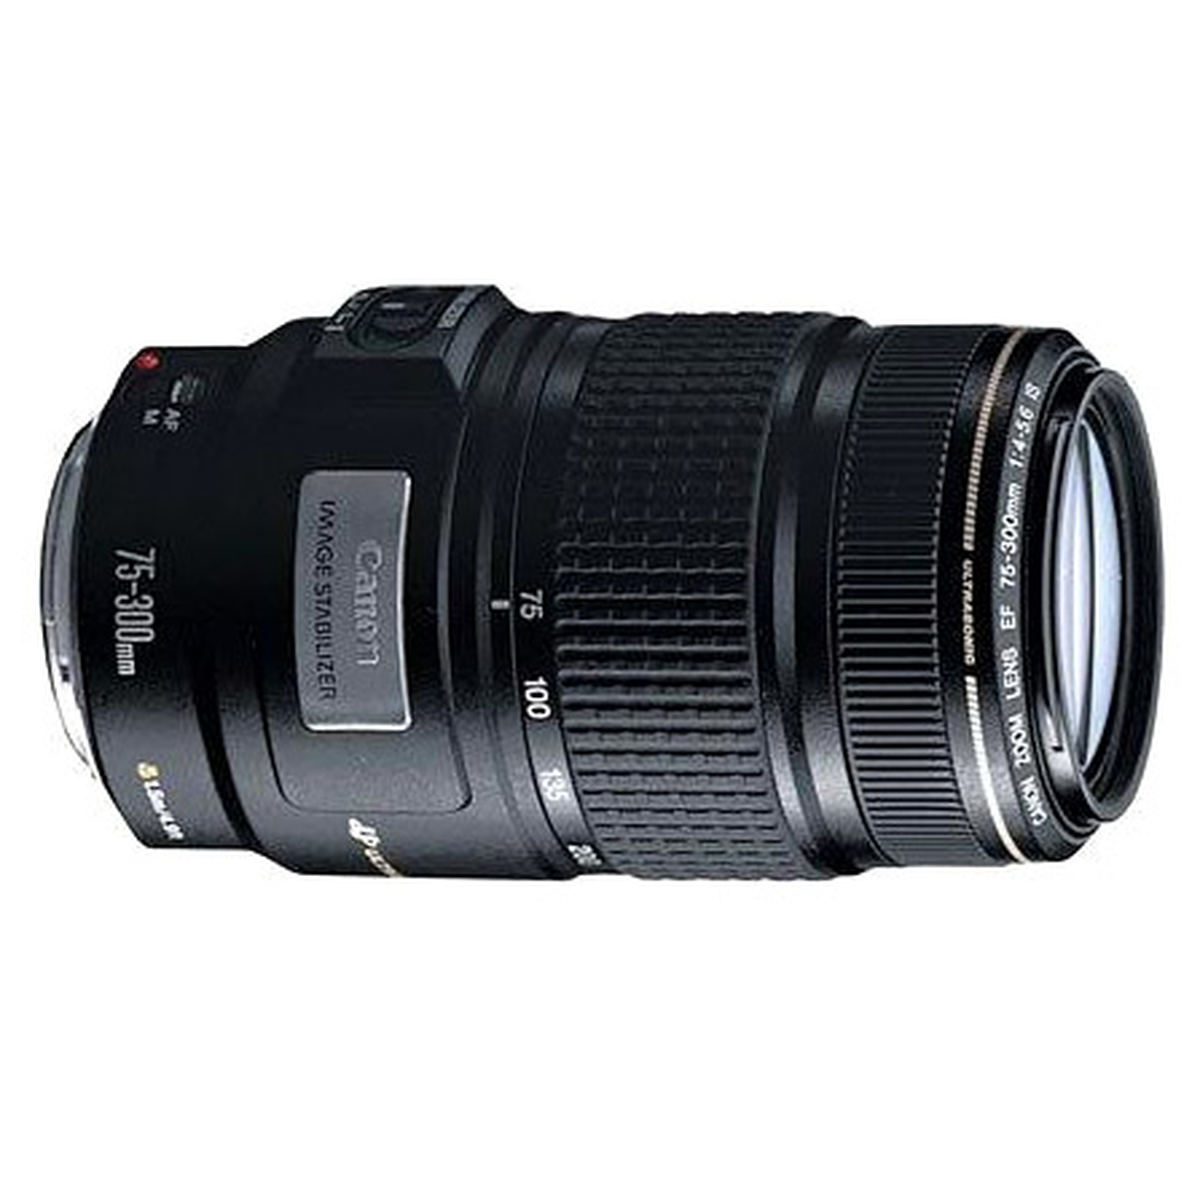 Canon EF 75-300mm f/4-5.6 IS USM : Specifications and Opinions